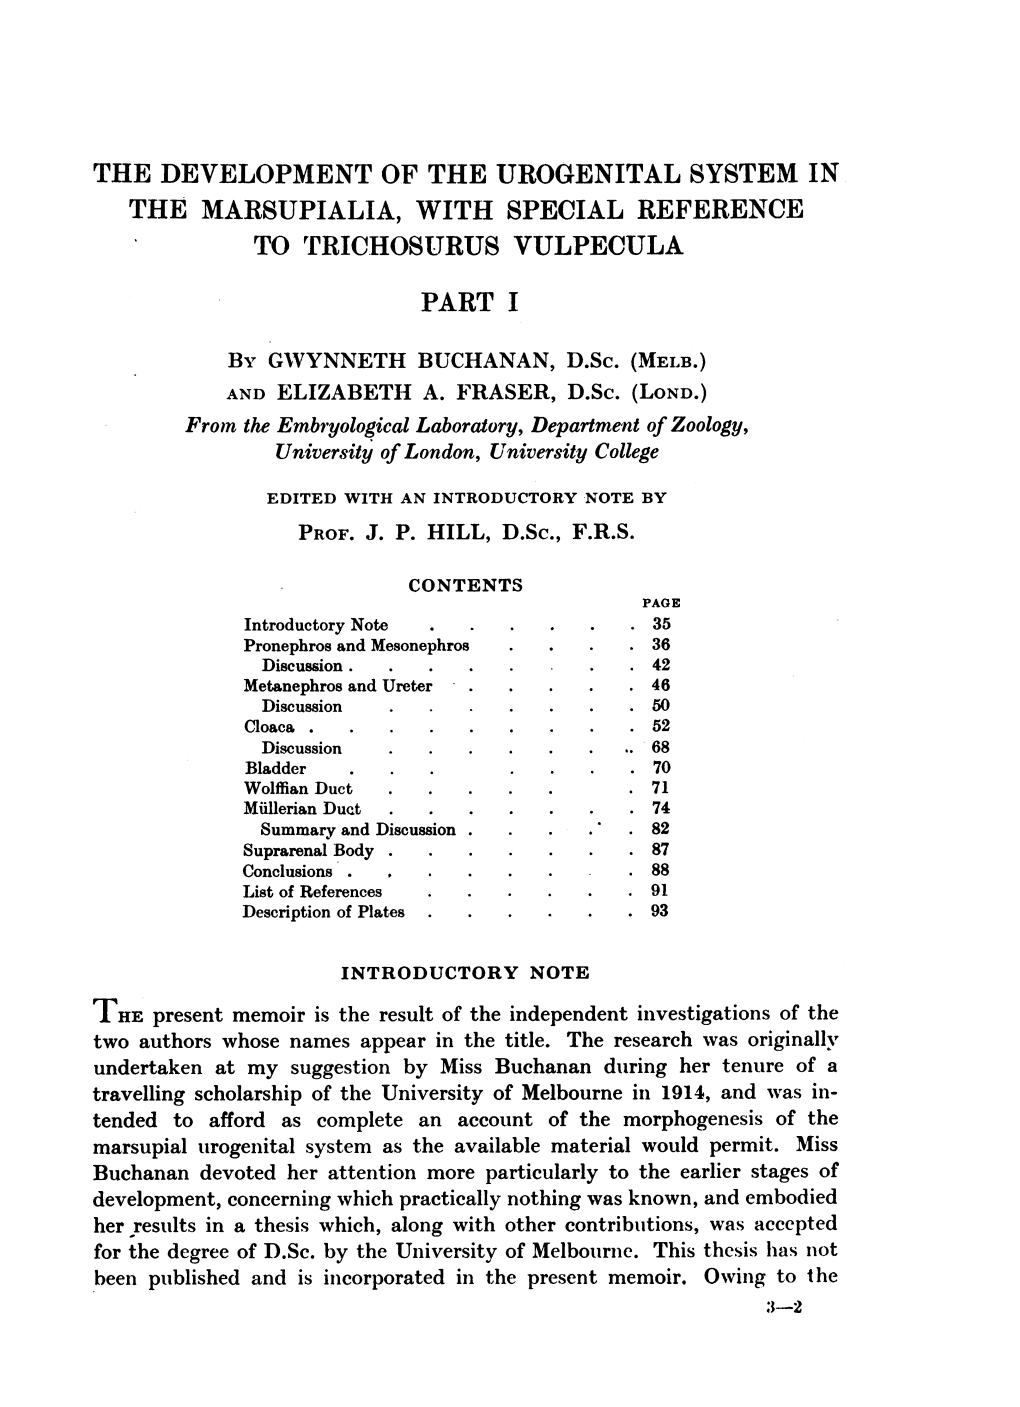 The Development of the Urogenital System in the Marsupialia, with Special Reference to Trichosurus Vulpecula Part I